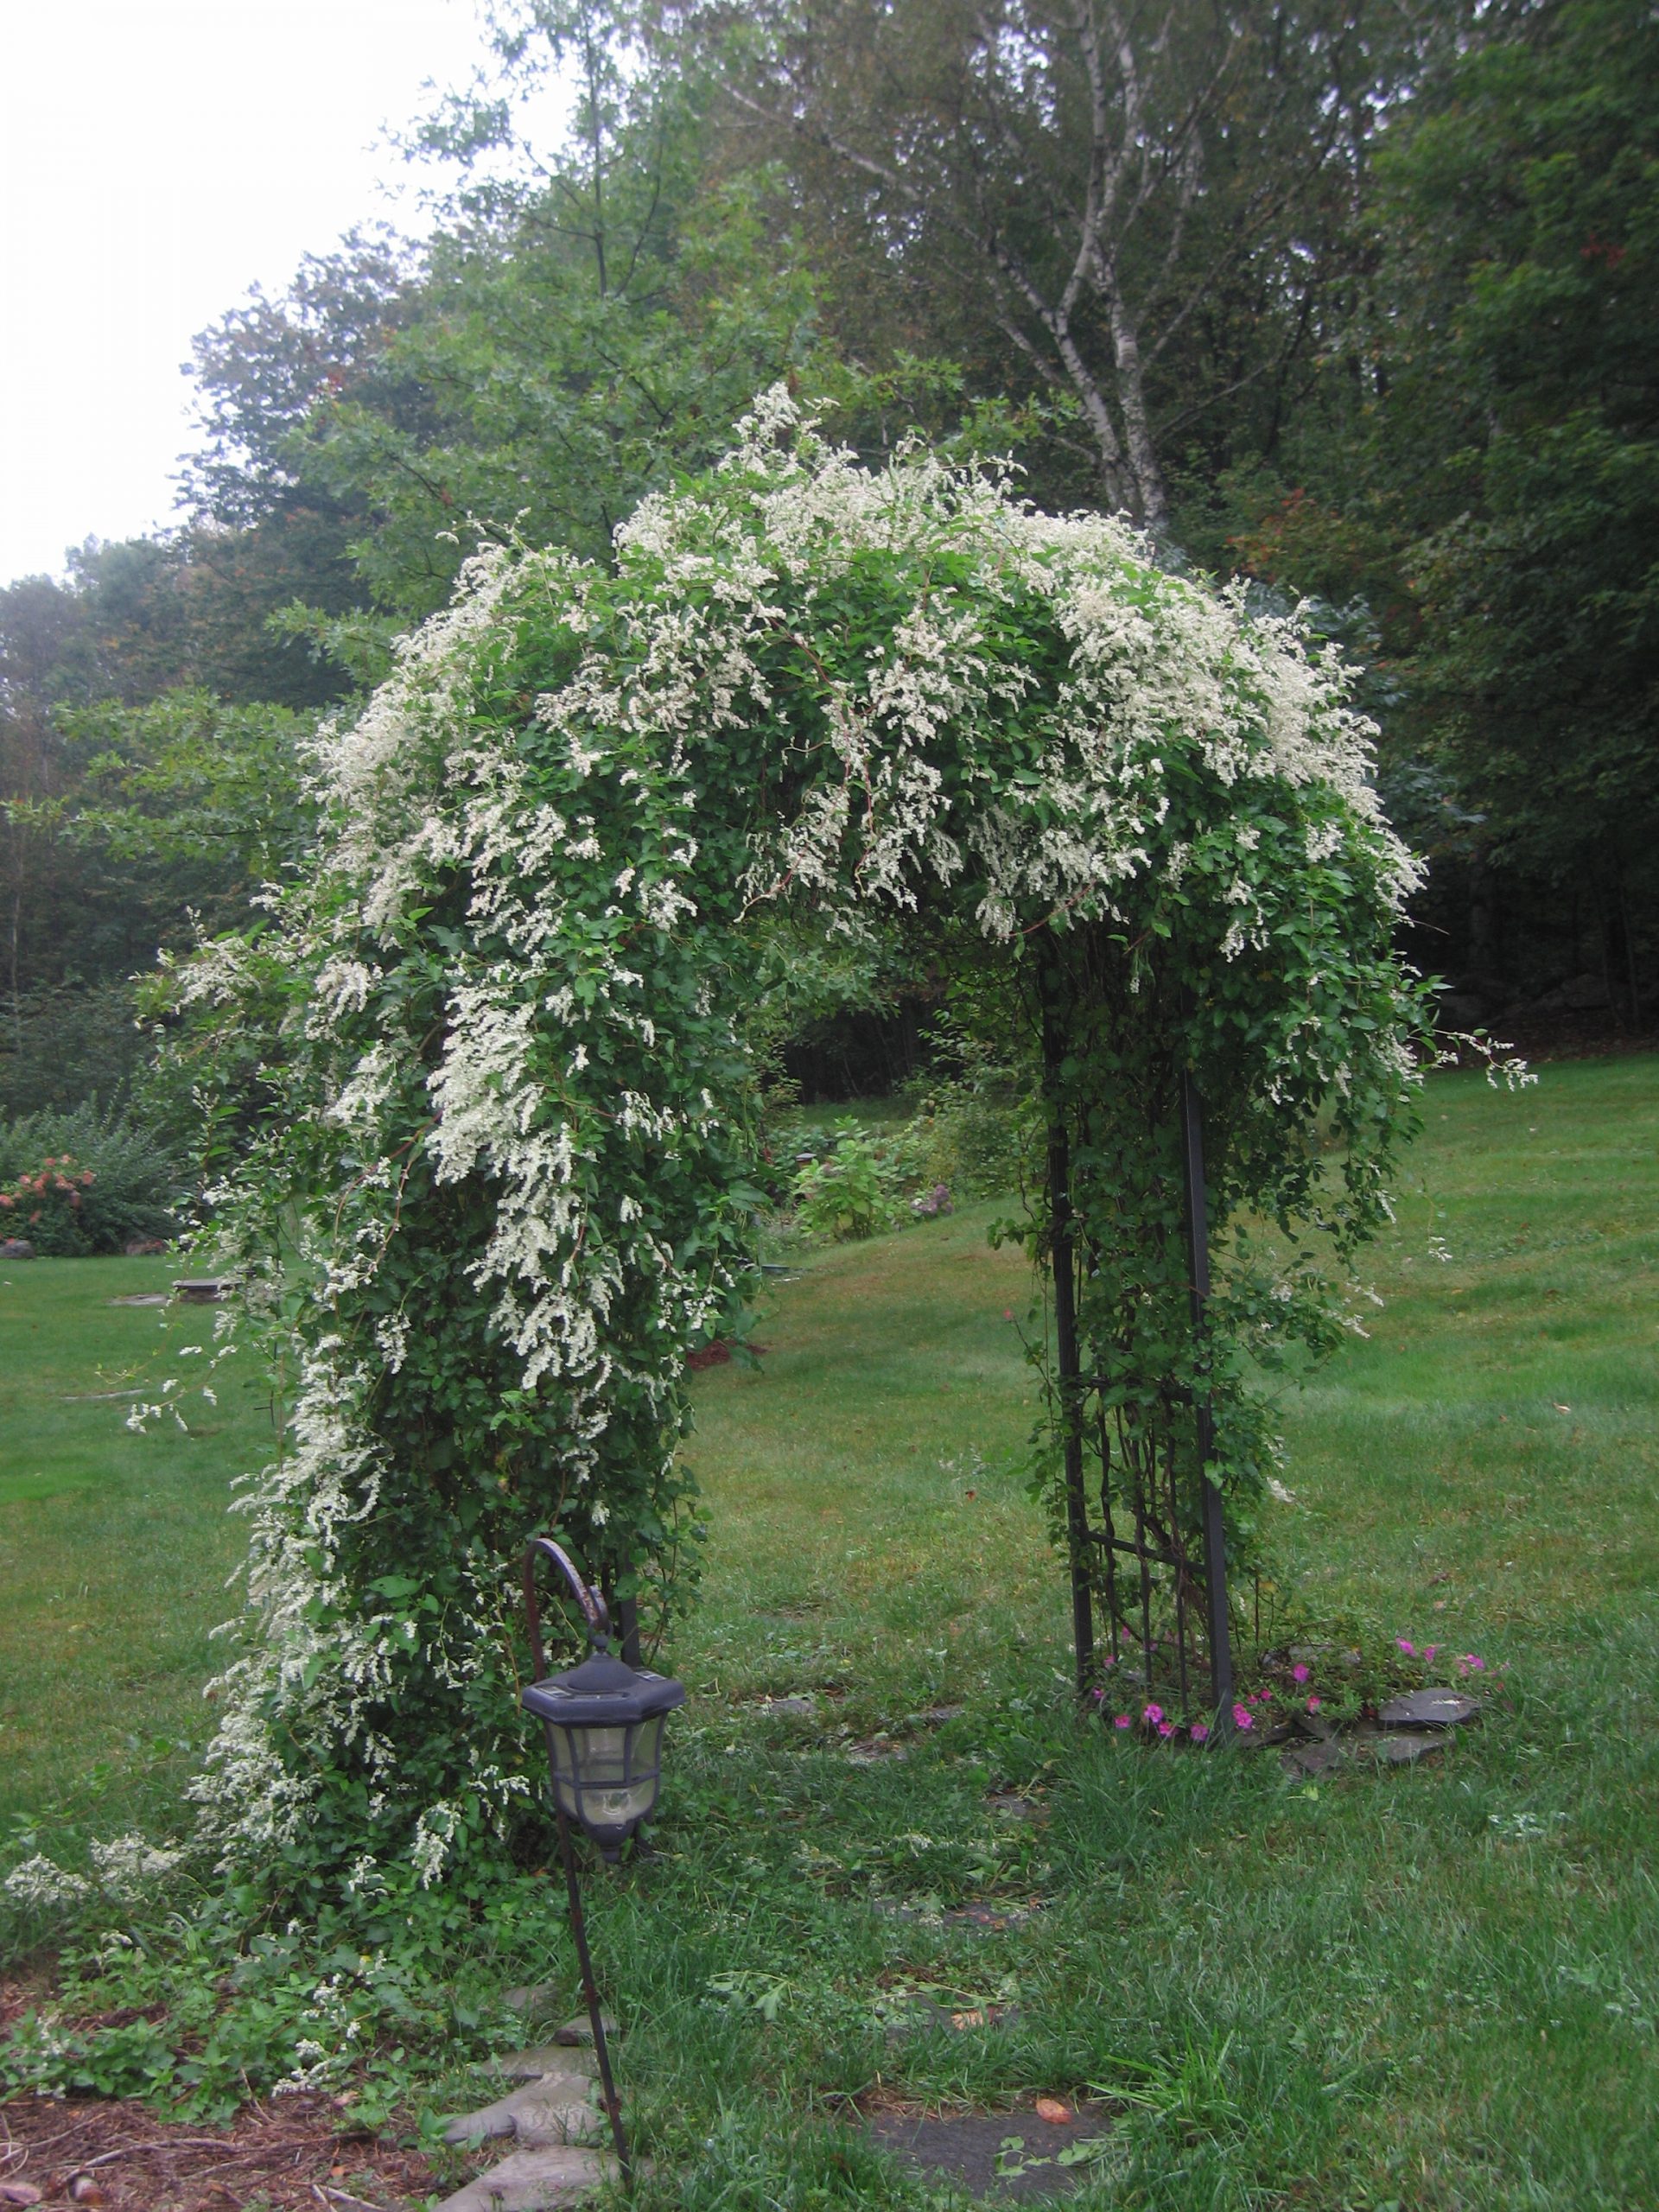 Flowered arbor at entrance to ritual space